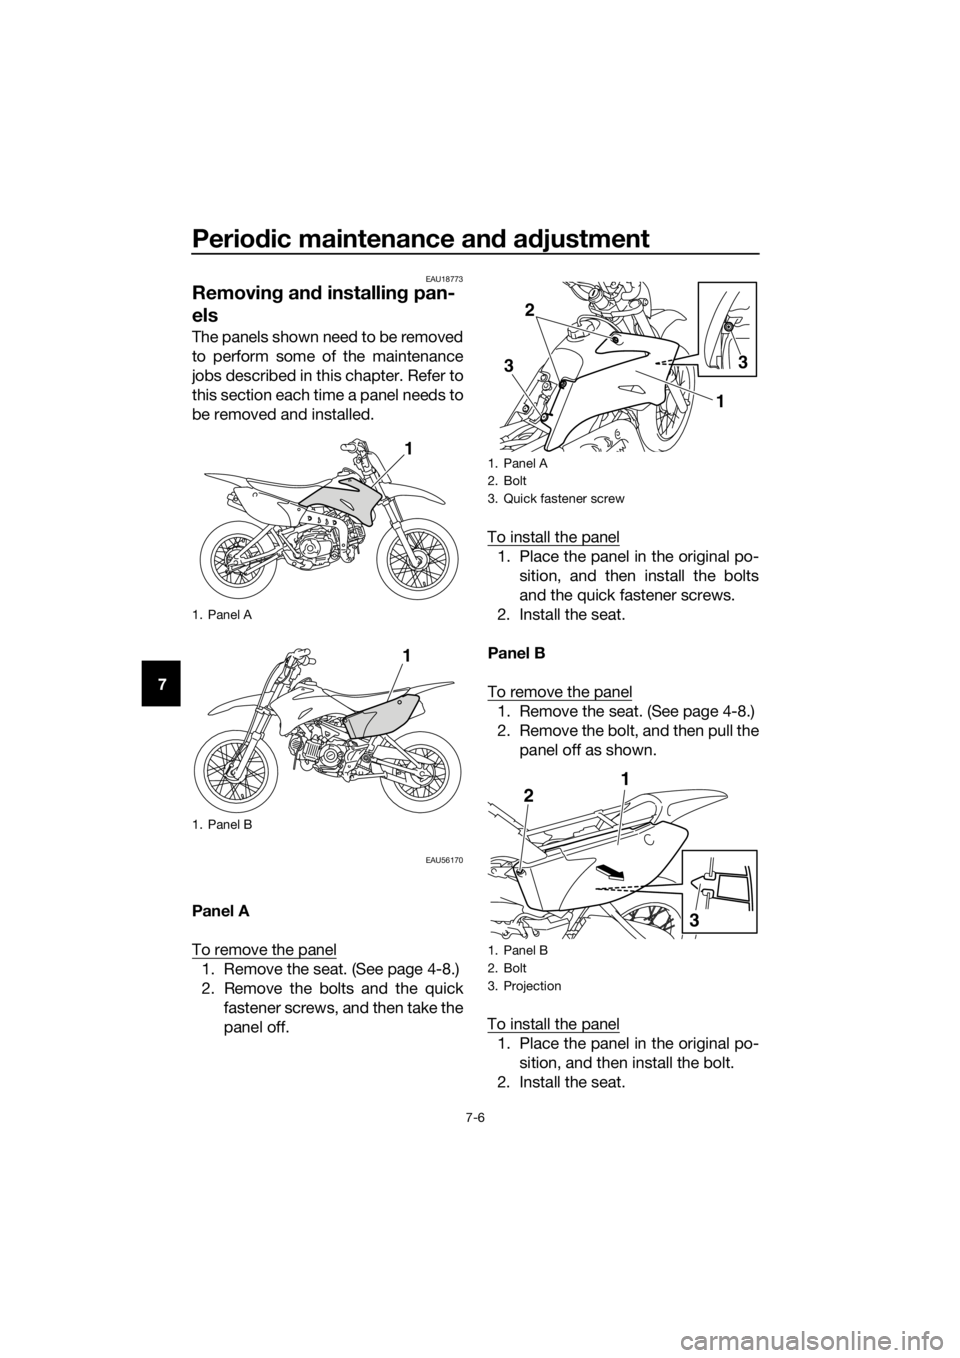 YAMAHA TT-R110E 2020 Service Manual Periodic maintenance an d a djustment
7-6
7
EAU18773
Removin g an d installin g pan-
els
The panels shown need to be removed
to perform some of the maintenance
jobs described in this chapter. Refer to